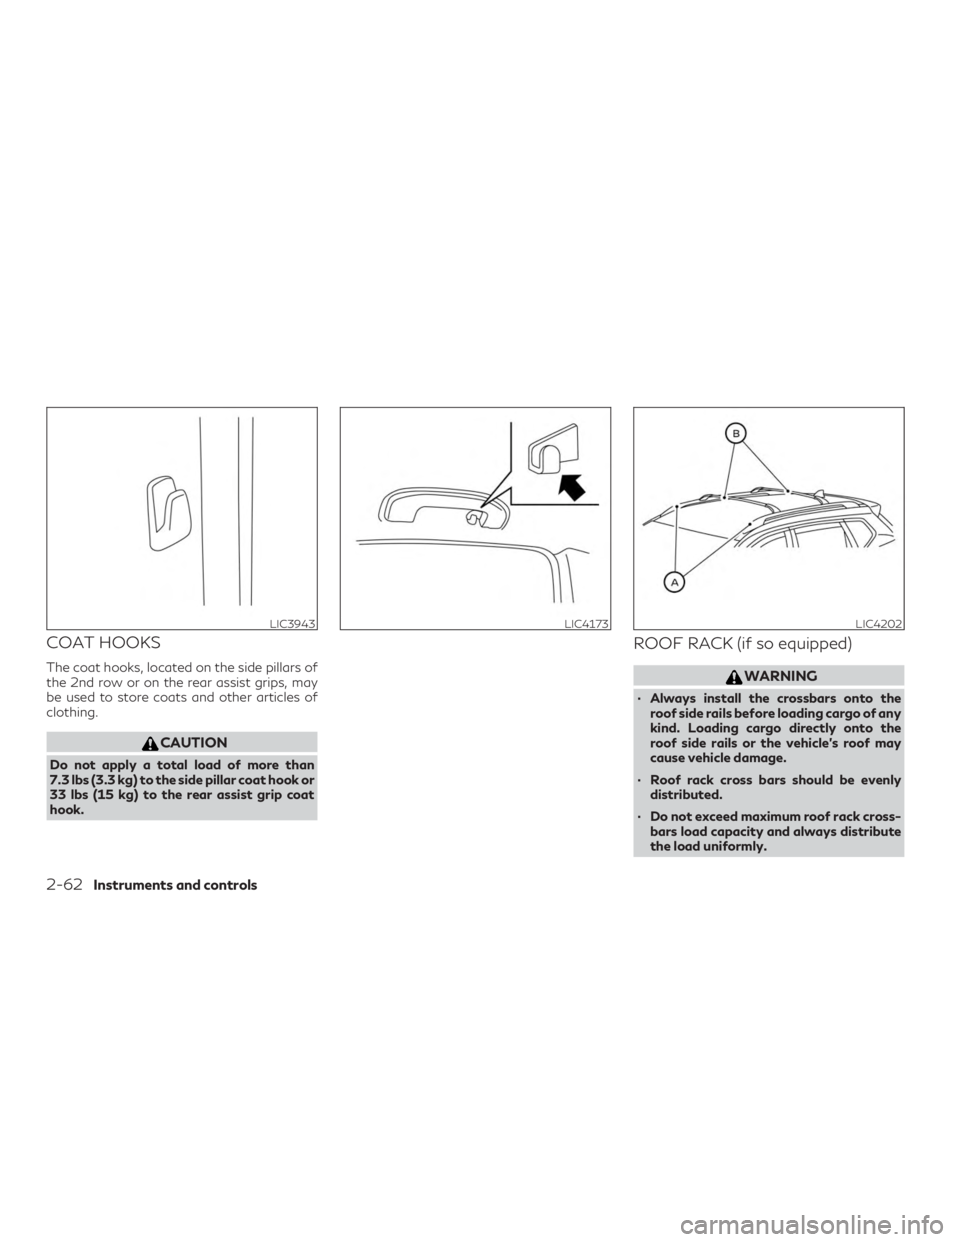 INFINITI QX50 2020  Owners Manual COAT HOOKS
The coat hooks, located on the side pillars of
the 2nd row or on the rear assist grips, may
be used to store coats and other articles of
clothing.
CAUTION
Do not apply a total load of more 